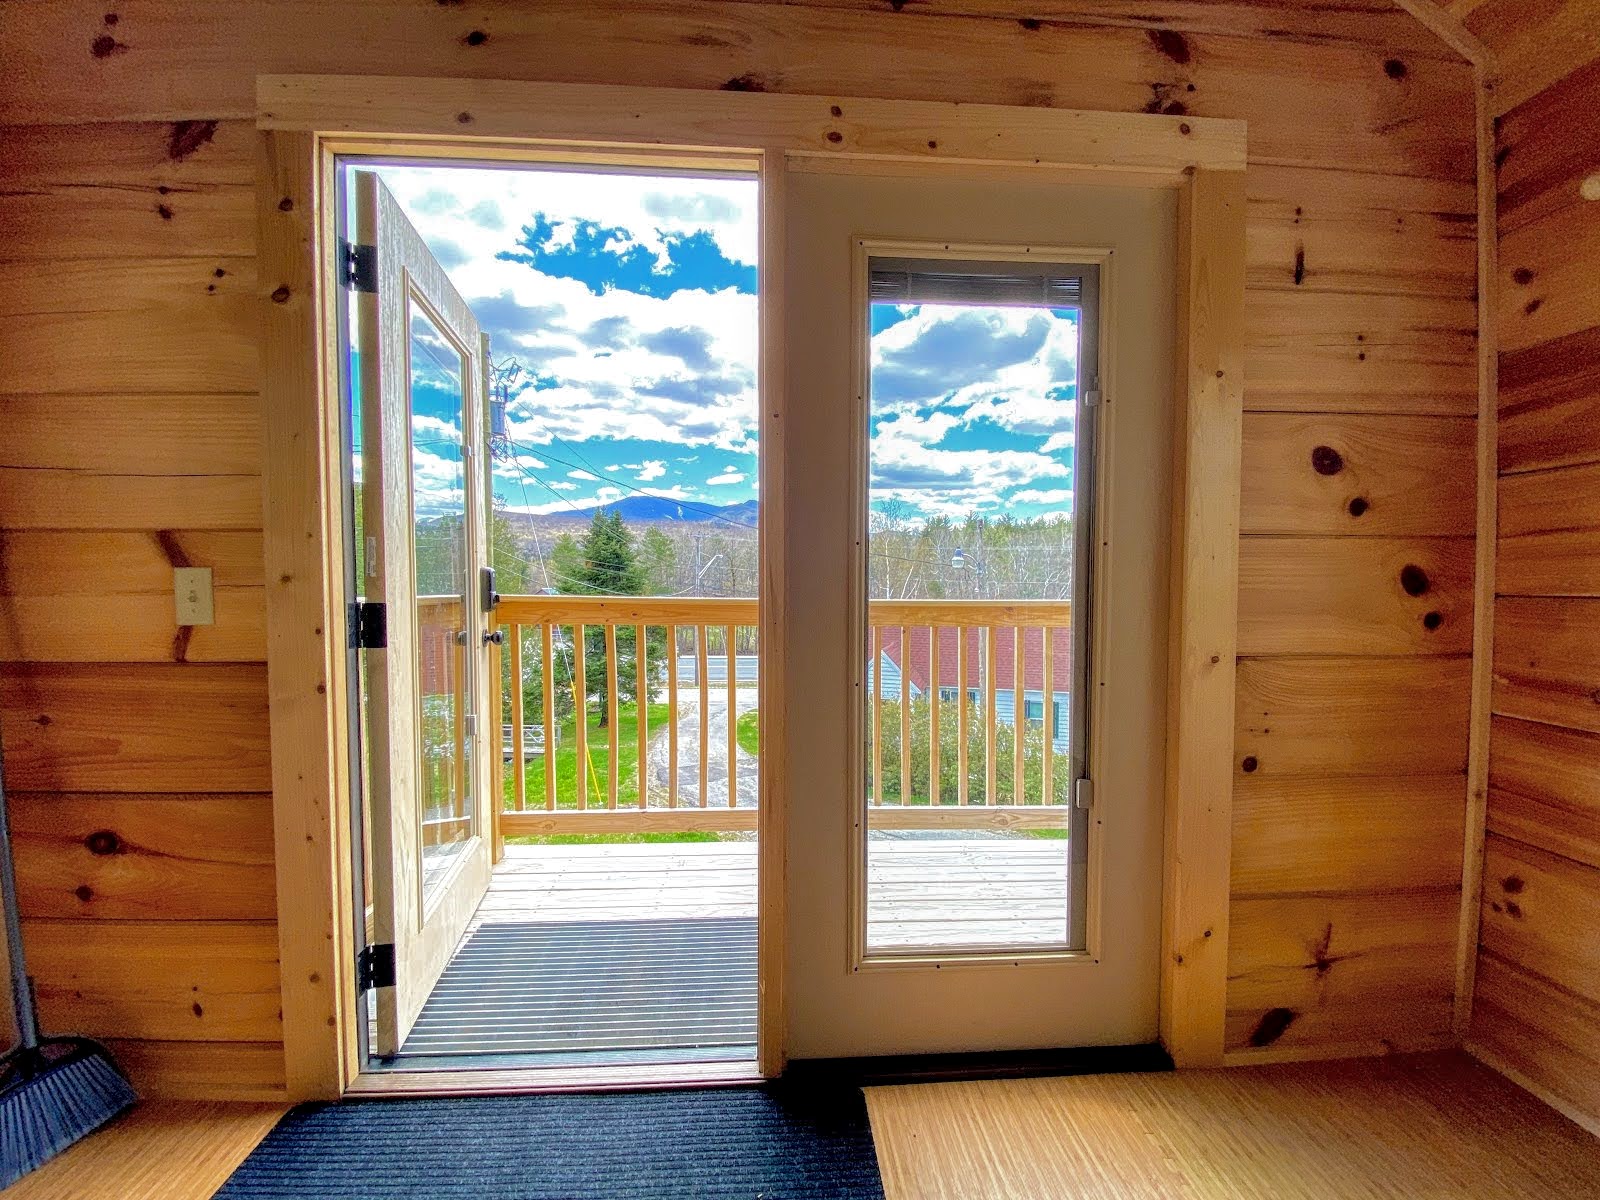 Set in a fantastic location, with beautiful mountain views, about 5 minutes (4.5 miles) from Bretton Woods and 20 minutes from Franconia Notch, Cannon and Santa's Village, Boulder Mountain View provides a new option for those seeking to explore the four s